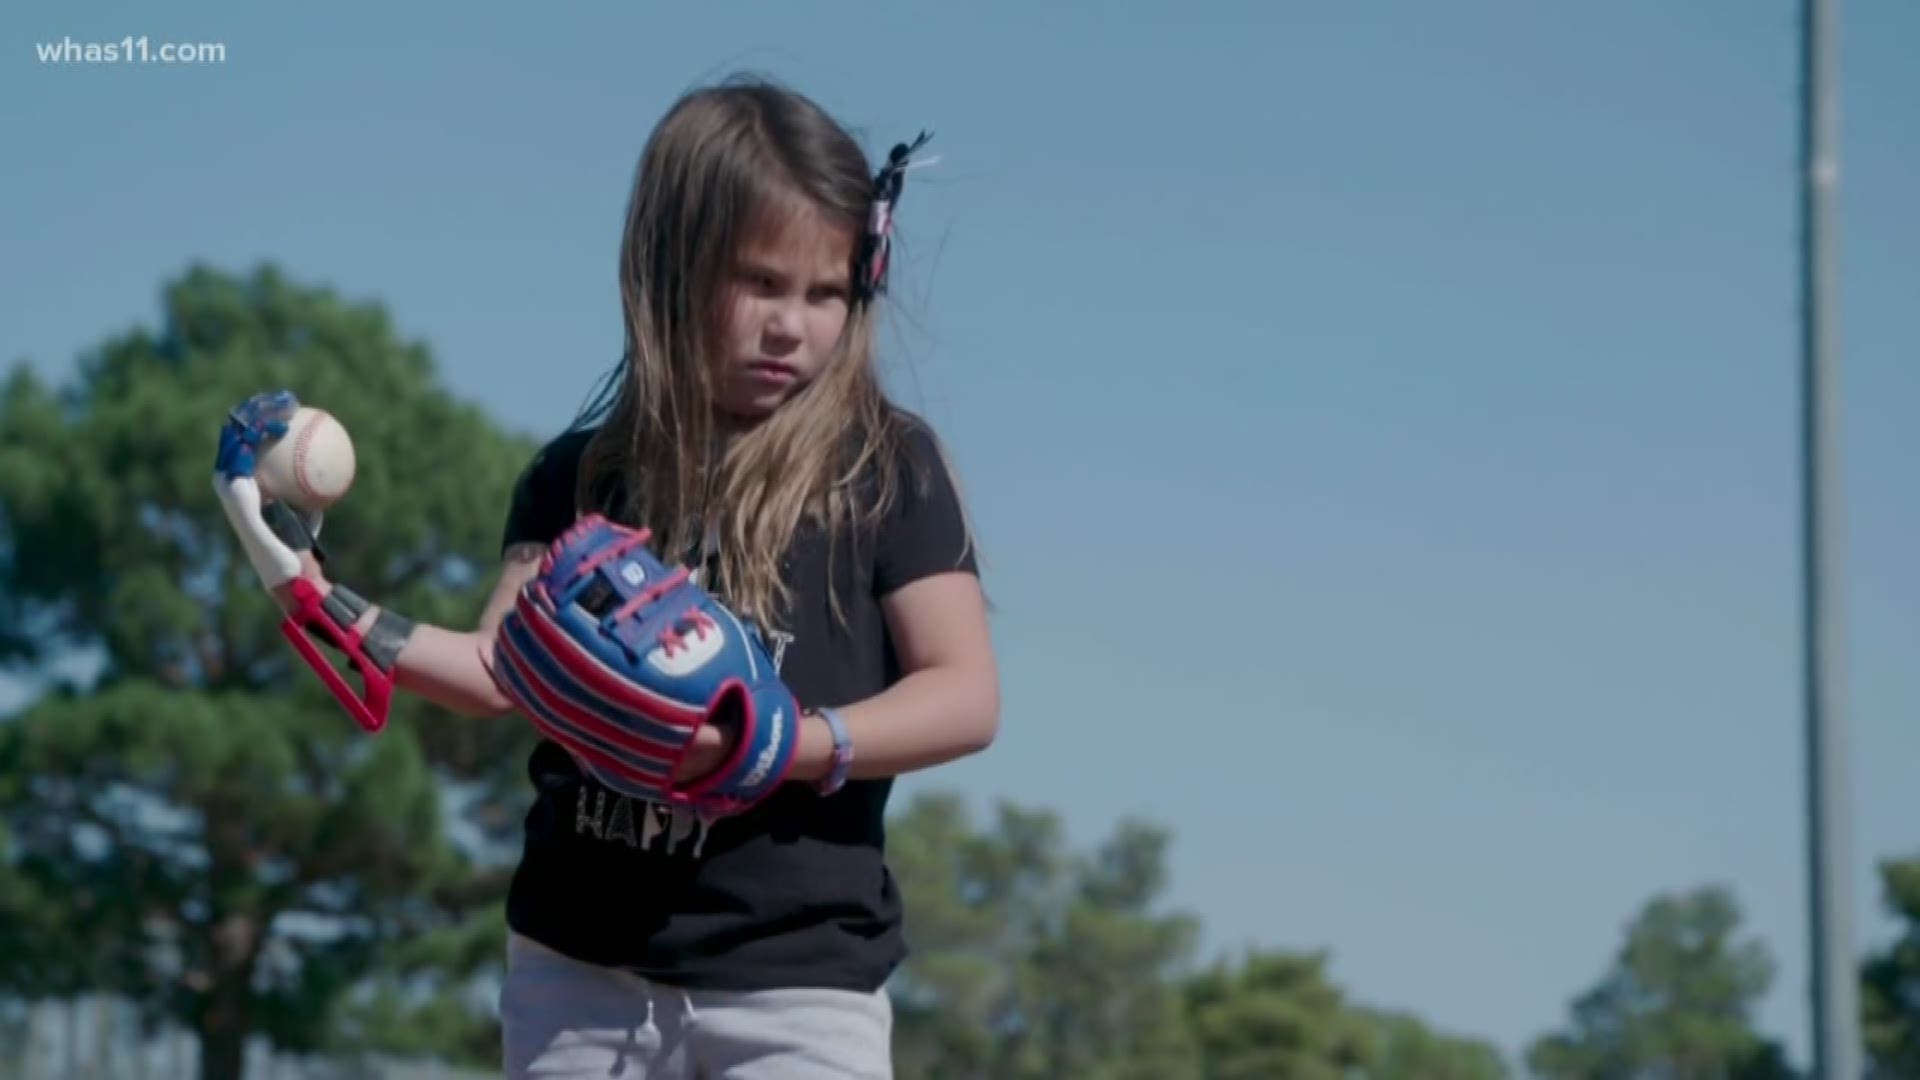 The 8-year-old from Henderson, Nevada, wants to be the first person to throw out the first pitch at all 30 Major League Baseball stadiums across the US.